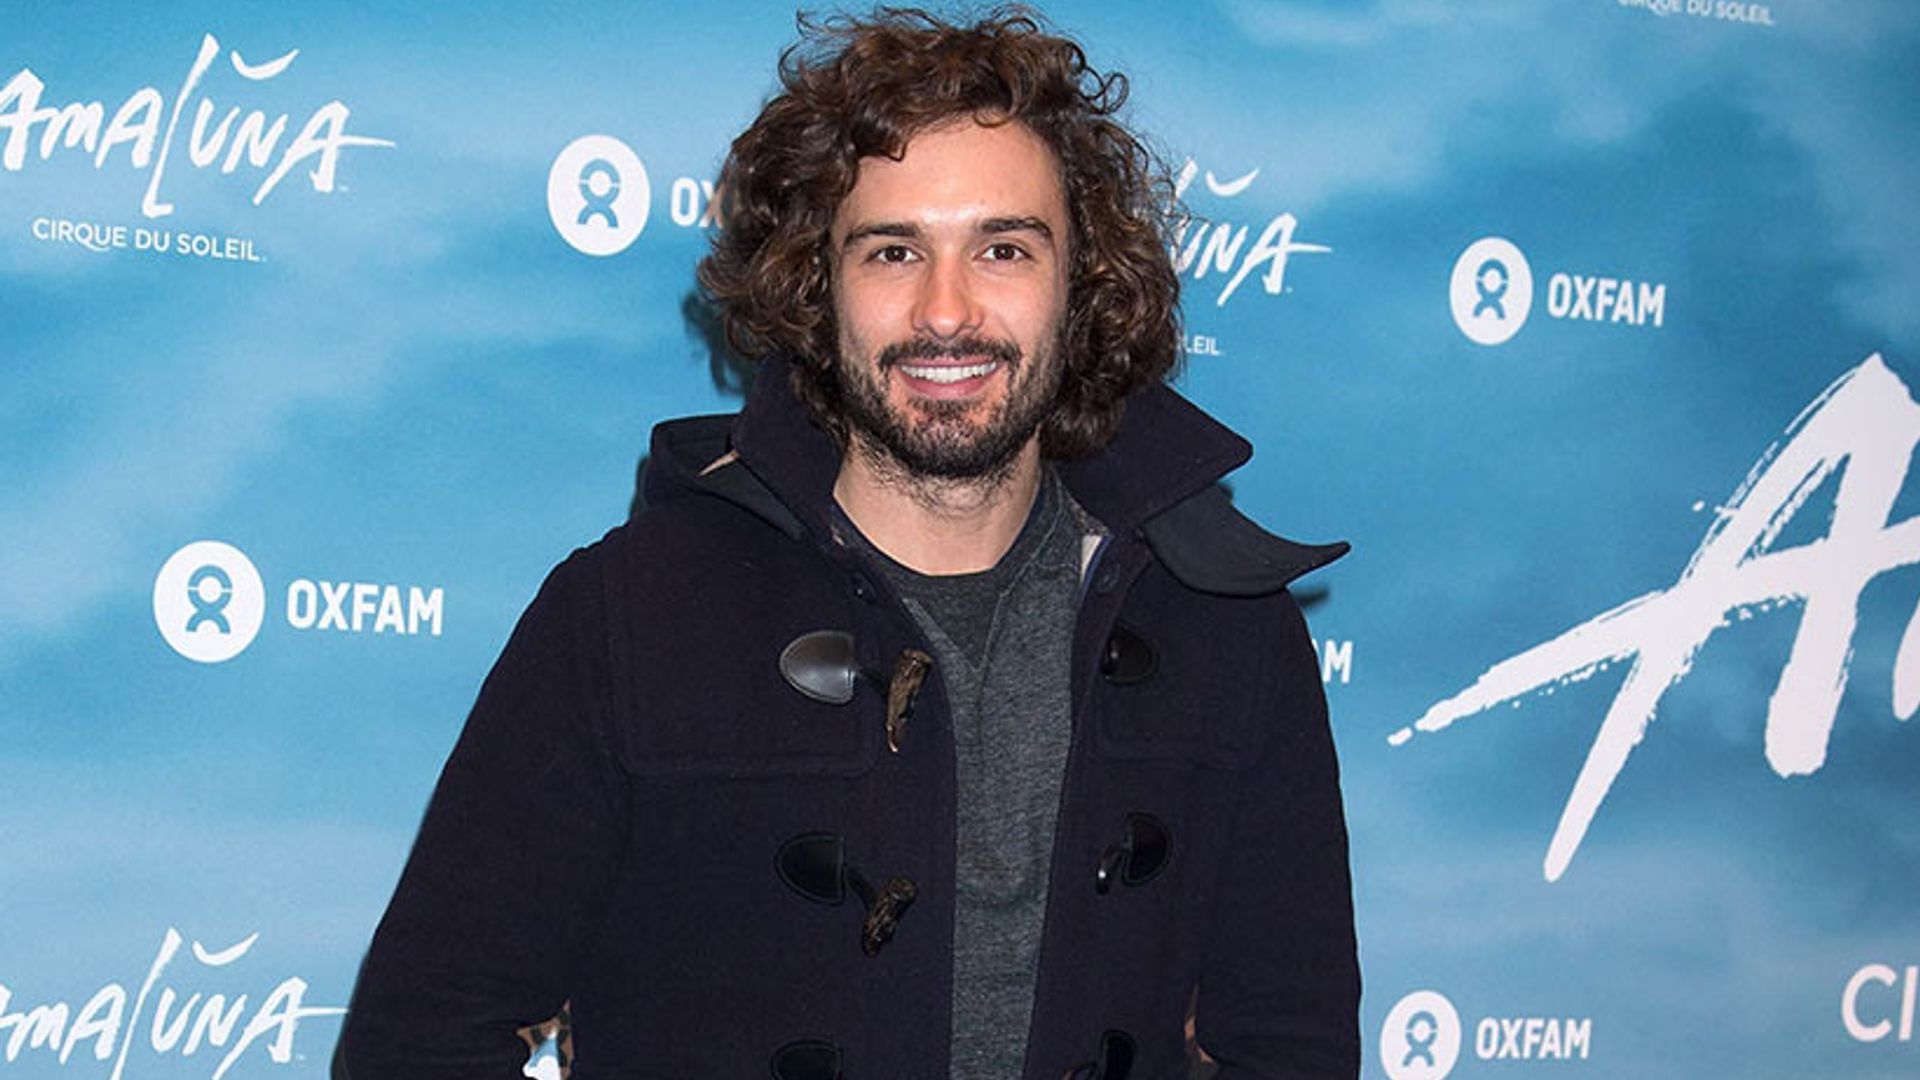 Joe Wicks reveals his top tip for getting your dream body